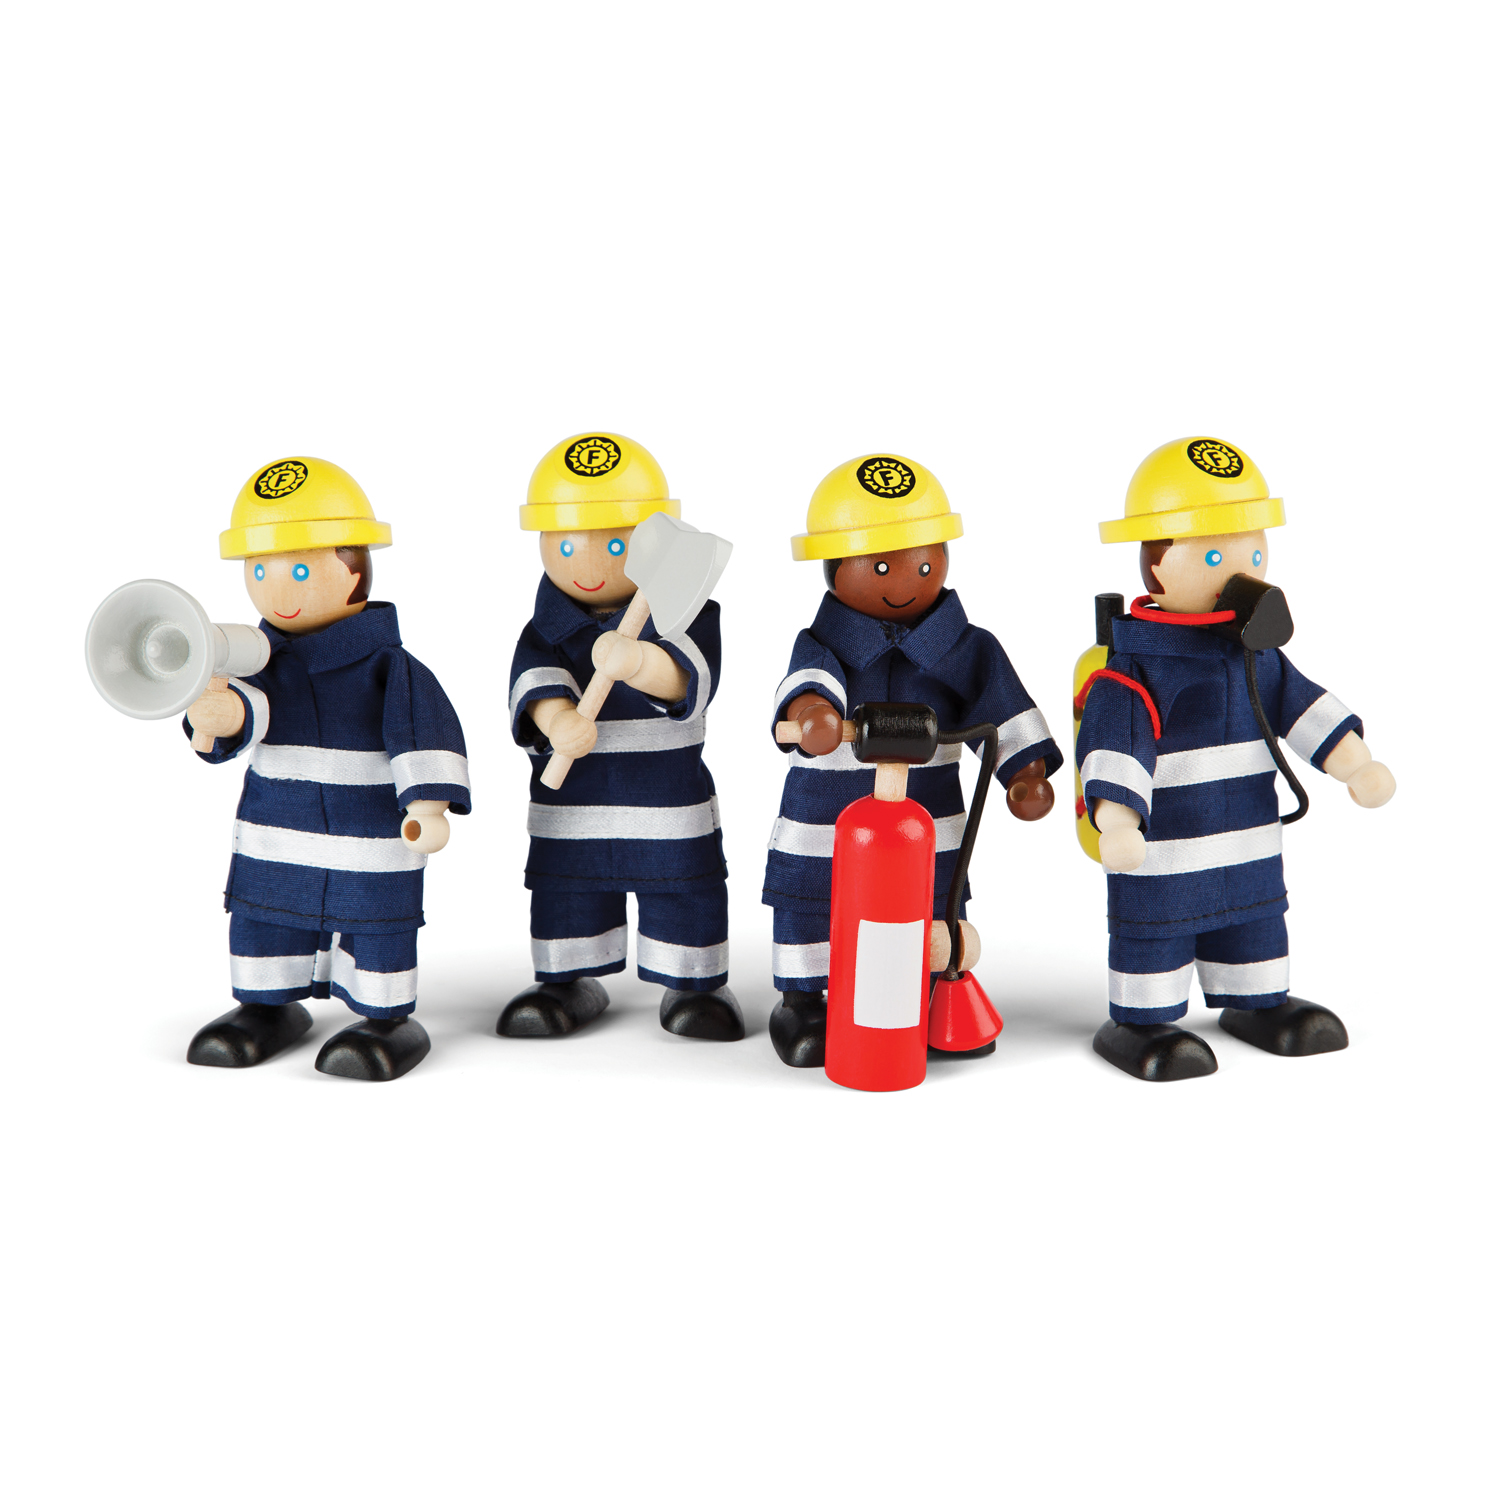 Bigjigs Toys Firefighters Figurines, Set of 4